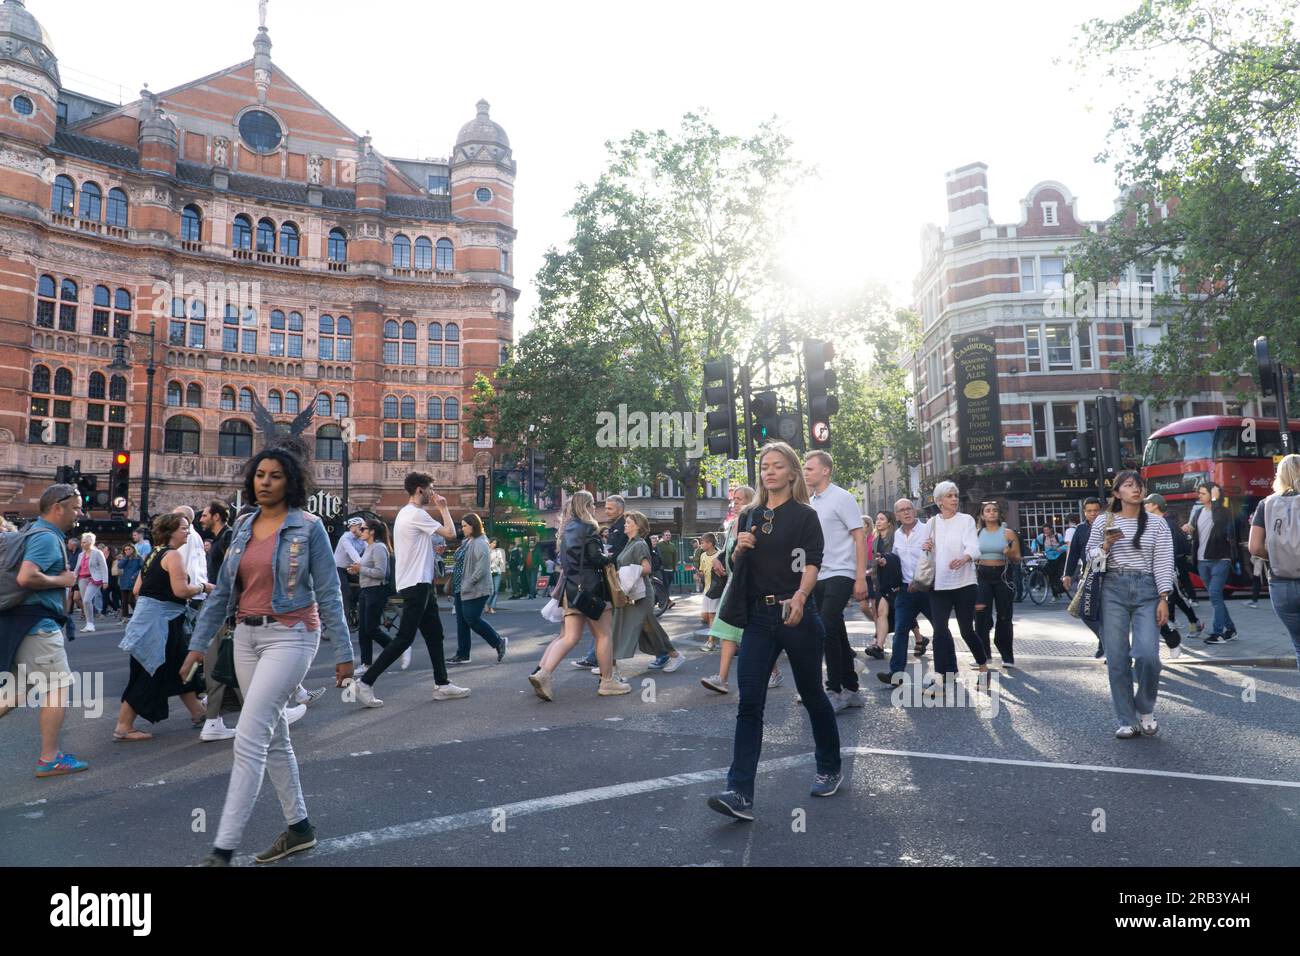 UK weather, 6 July 2023, London: After a few colder than average days, warm weather returns to London, bringing crowds into Soho. At Cambridge Circus people cross the road, each seeming oblivious to the others. Credit: Anna Watson/Alamy Live News Stock Photo